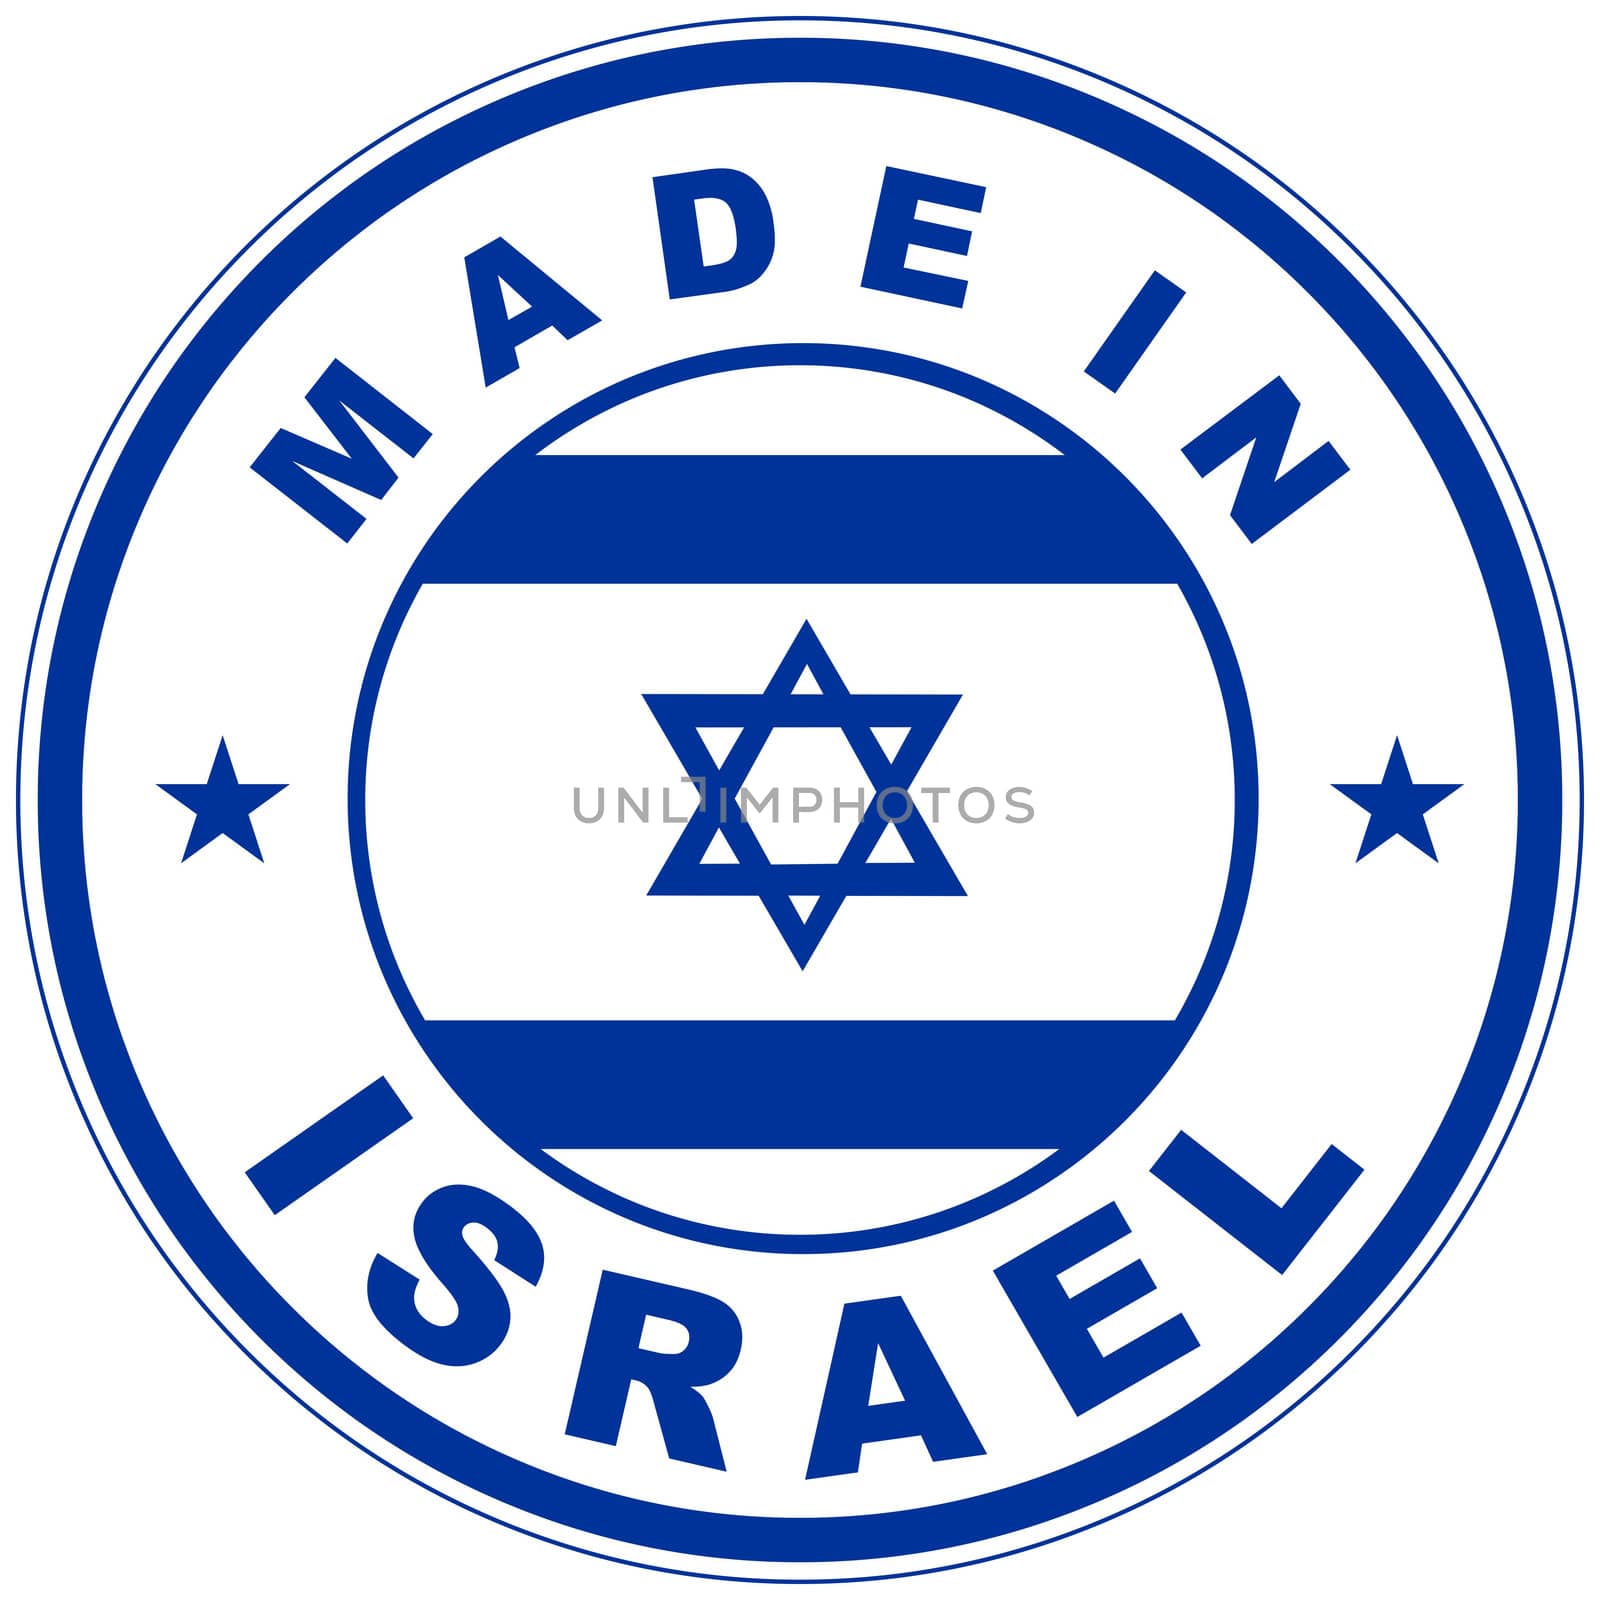 made in israel by tony4urban